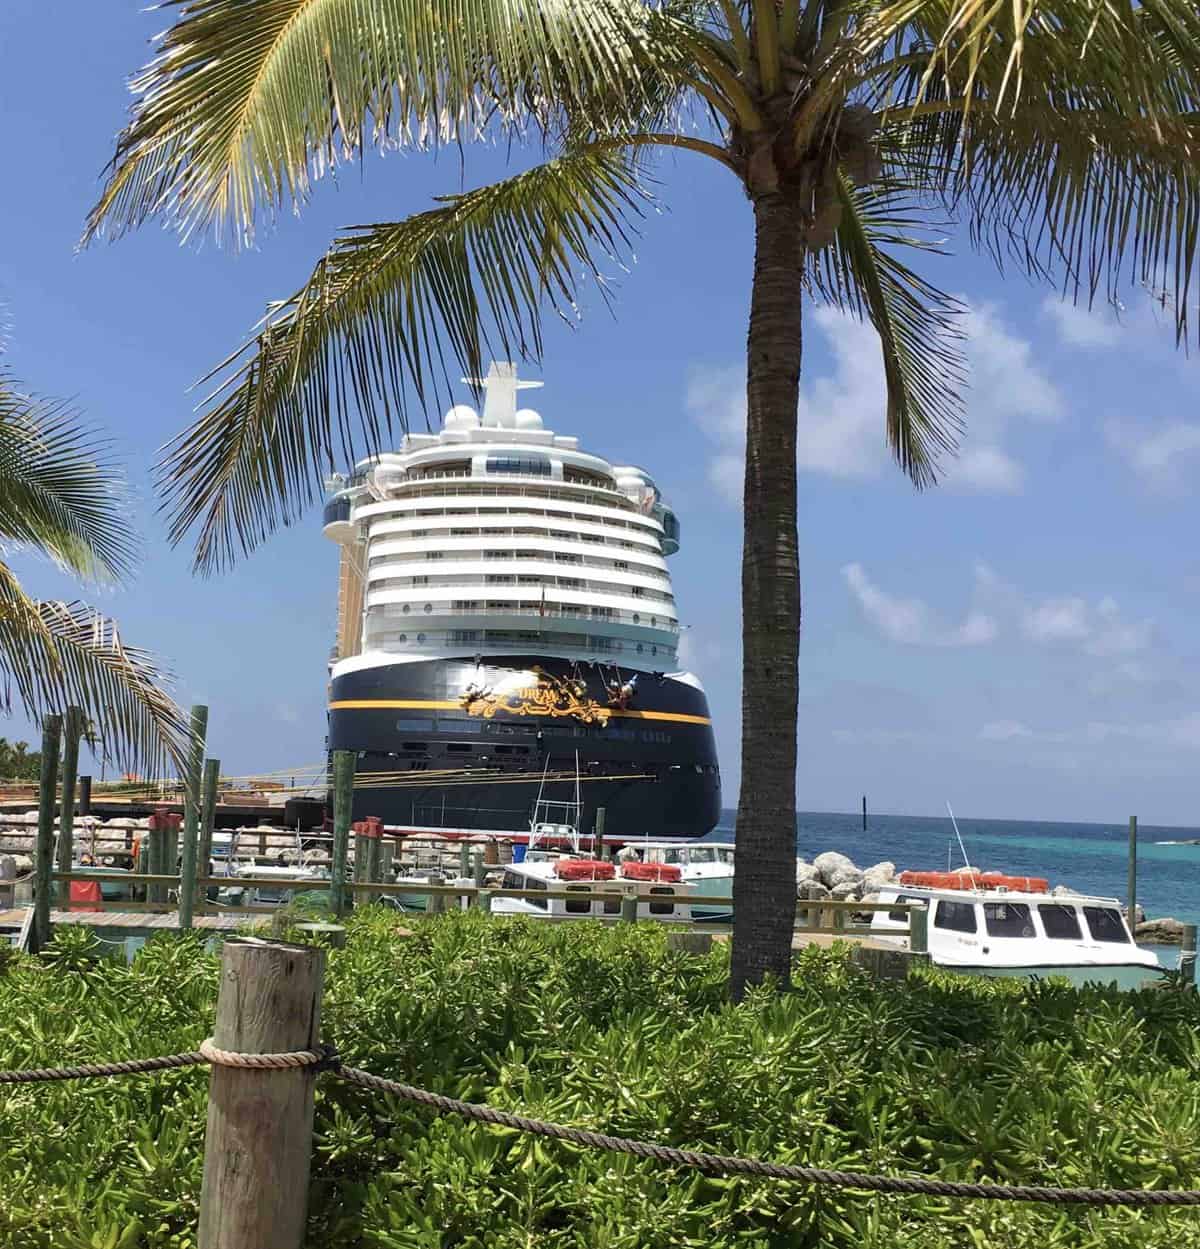 The Disney Dream Cruise ship in the port, grass and a palm tree in the foreground, ship, ocean and port in the background